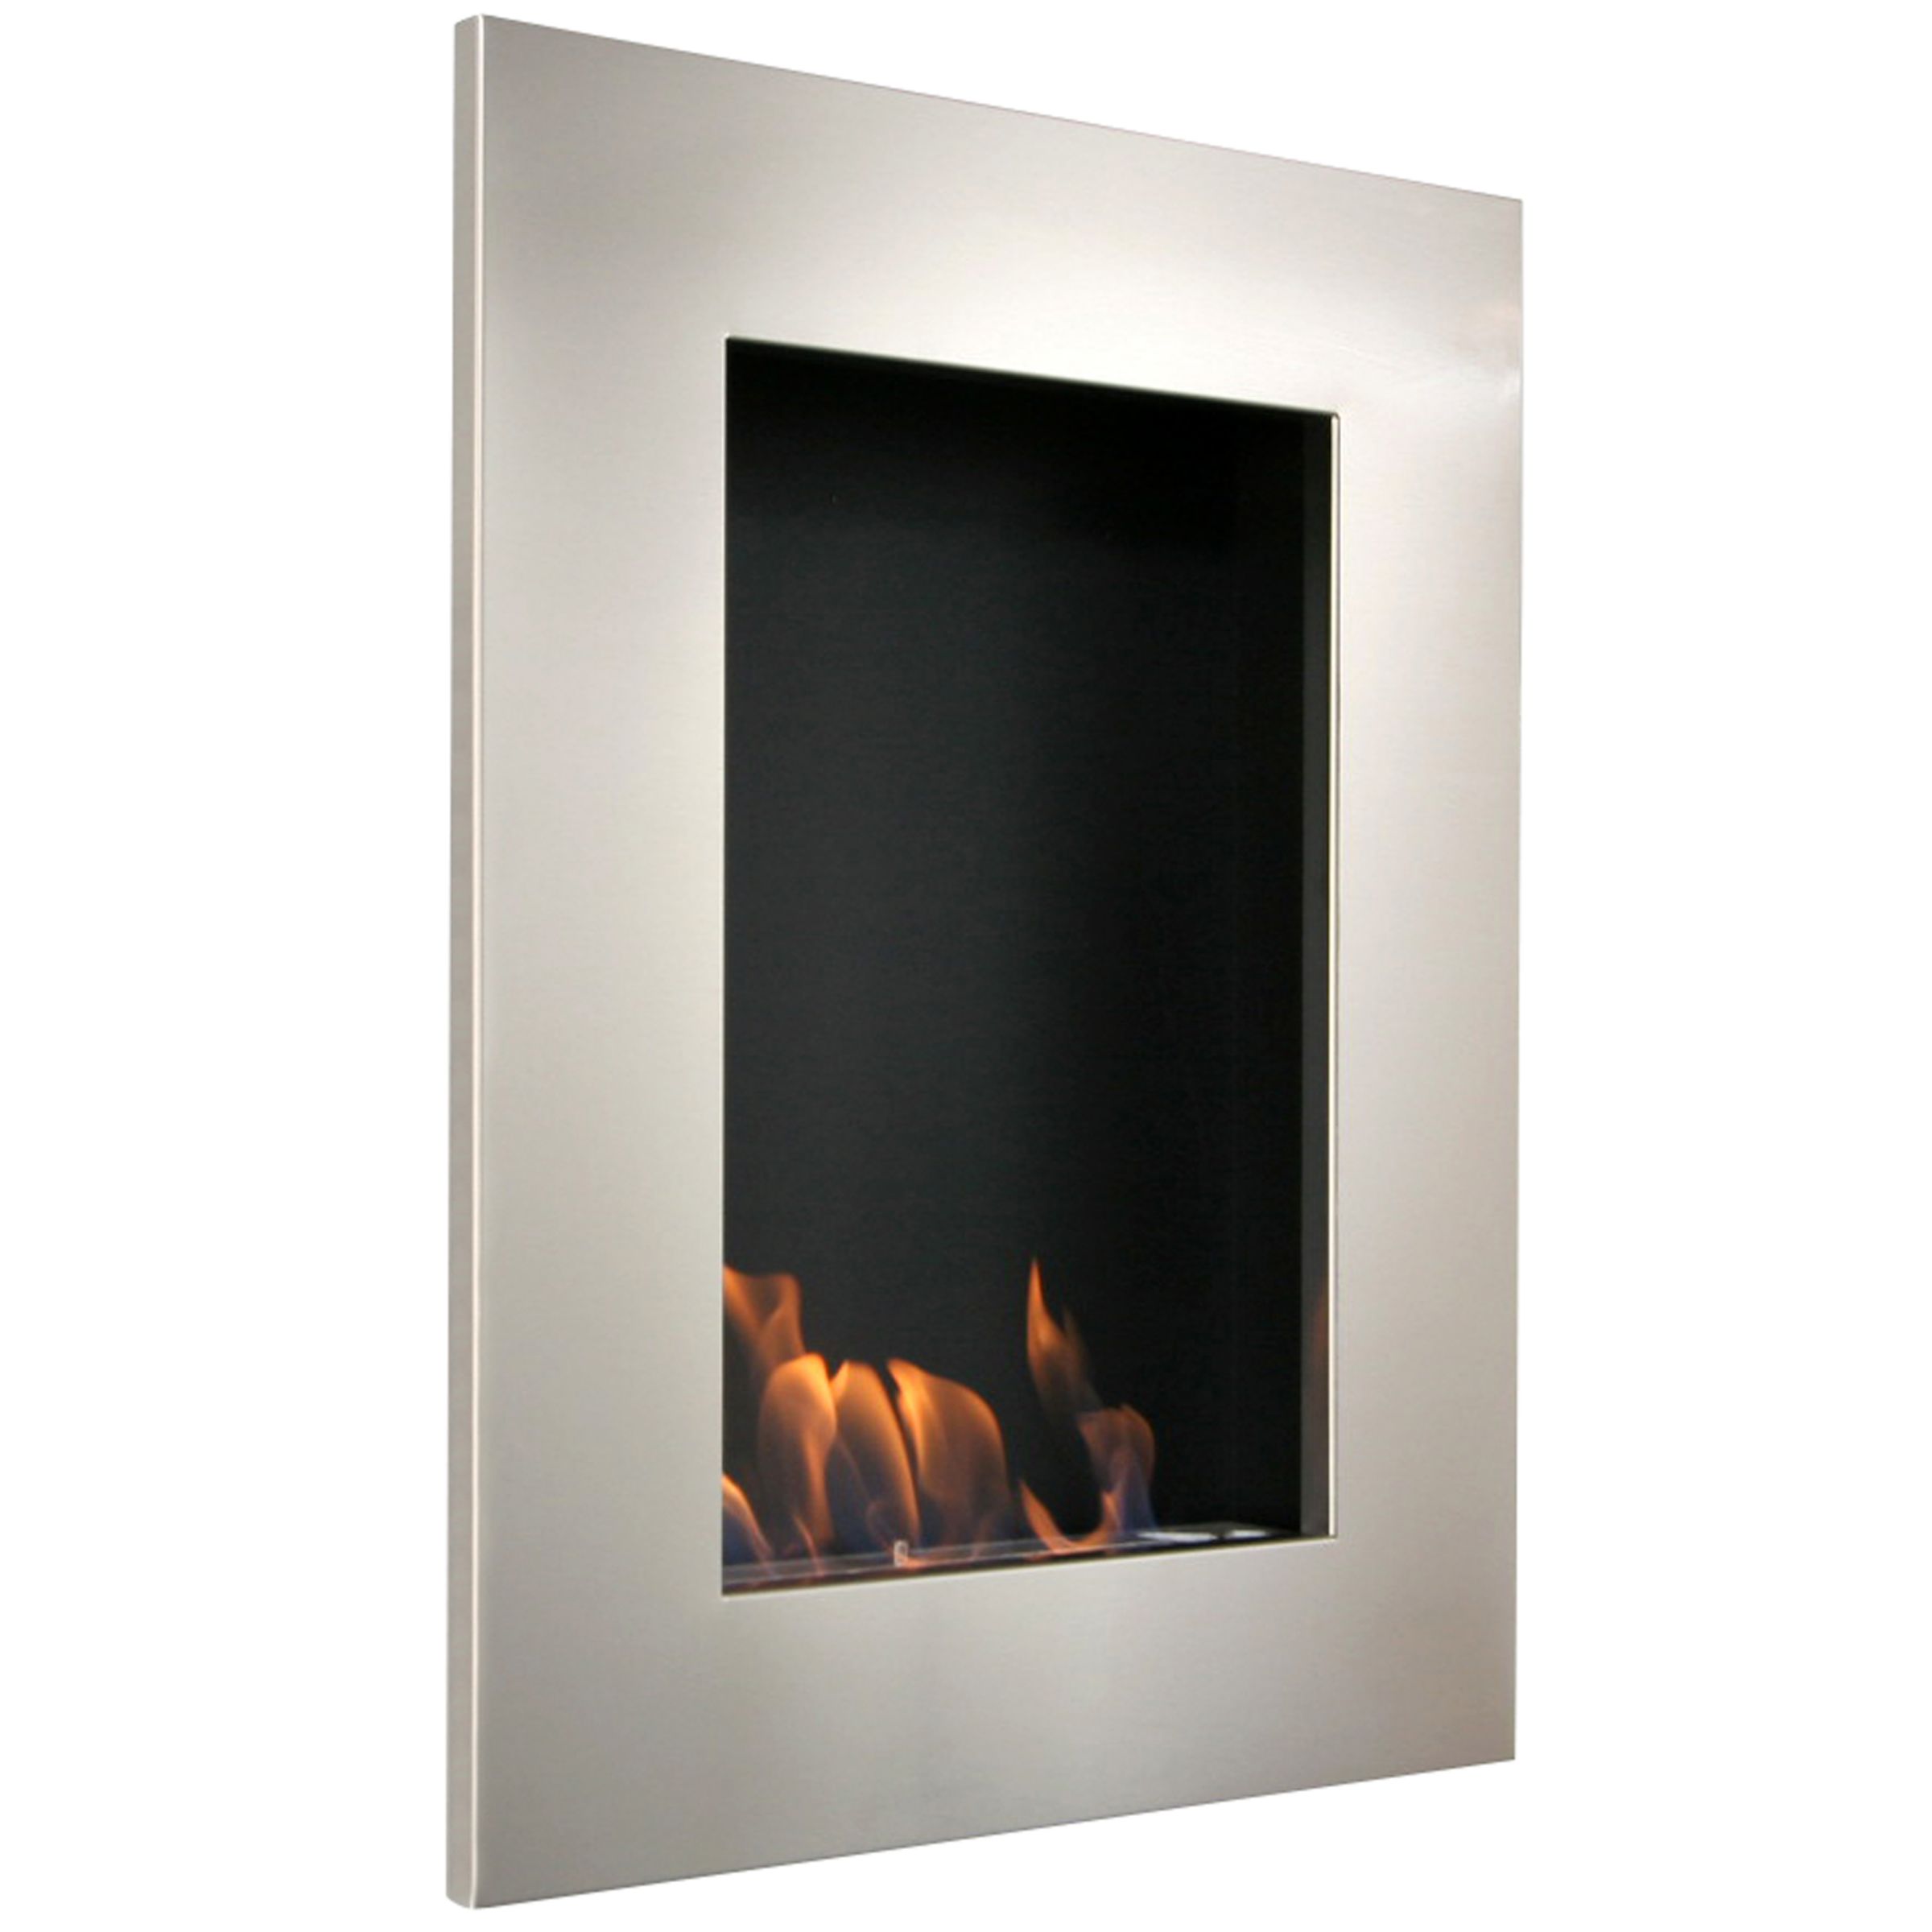 Decoflame® New York Tower Fire, Brushed Steel at JohnLewis